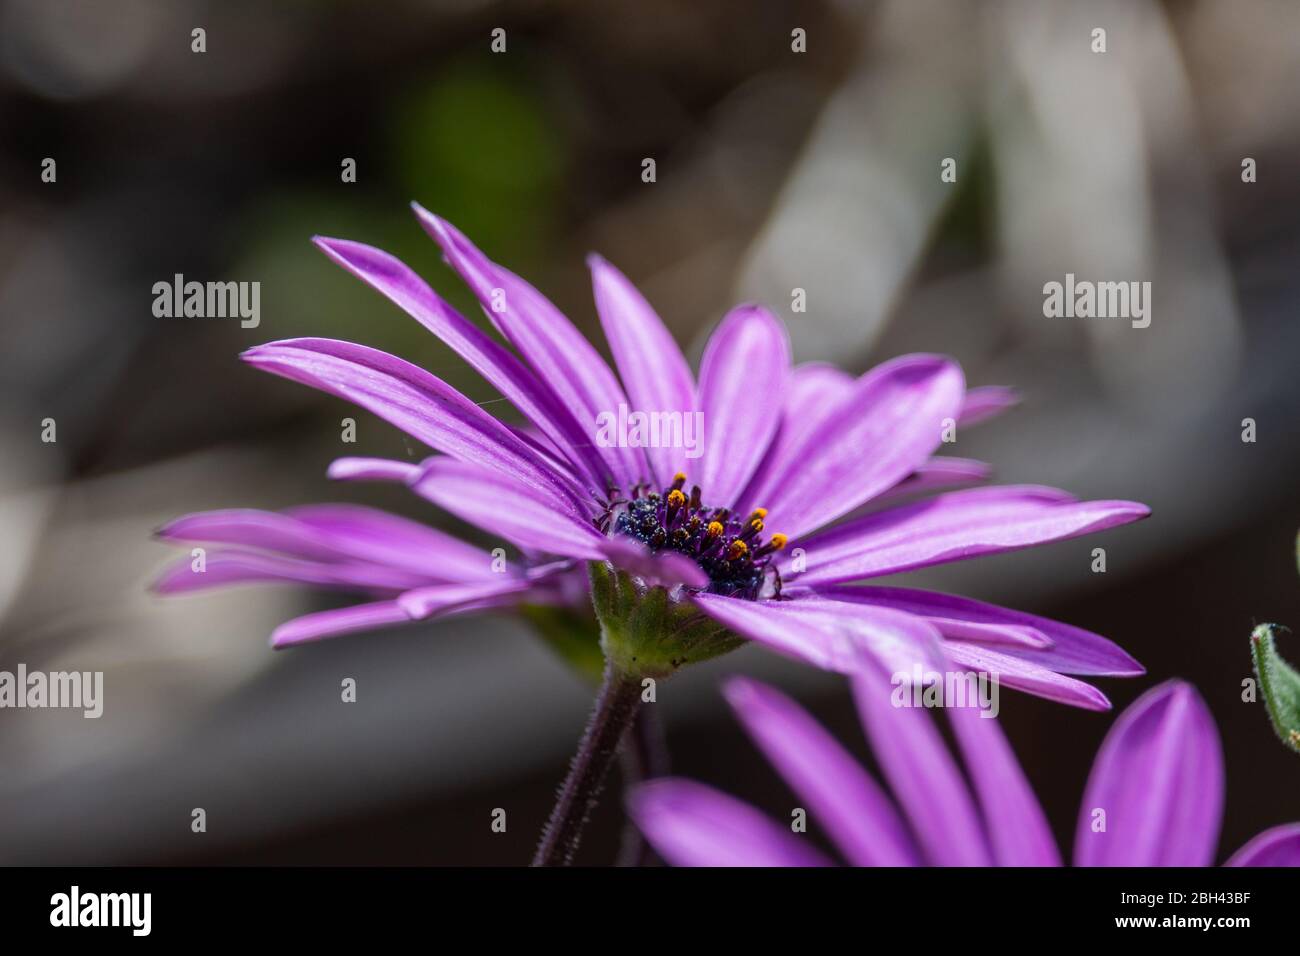 Purple African daisy flower with yellow stigma beginning to open up showing pollen on the tips Stock Photo